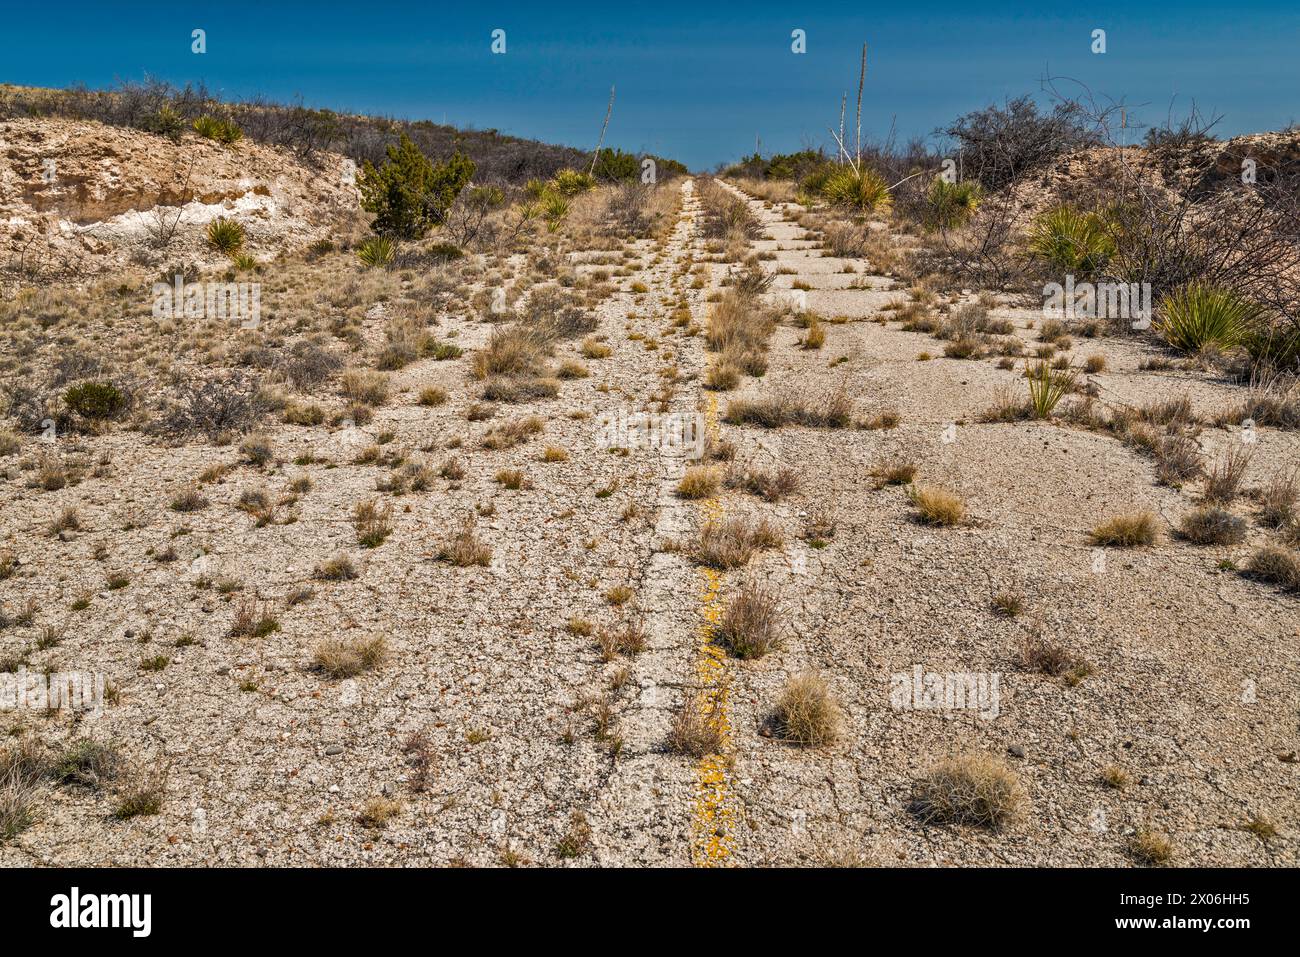 Abandoned section of US-180, US-62 highway with overgrowth, near Guadalupe Mountains, Texas, USA Stock Photo